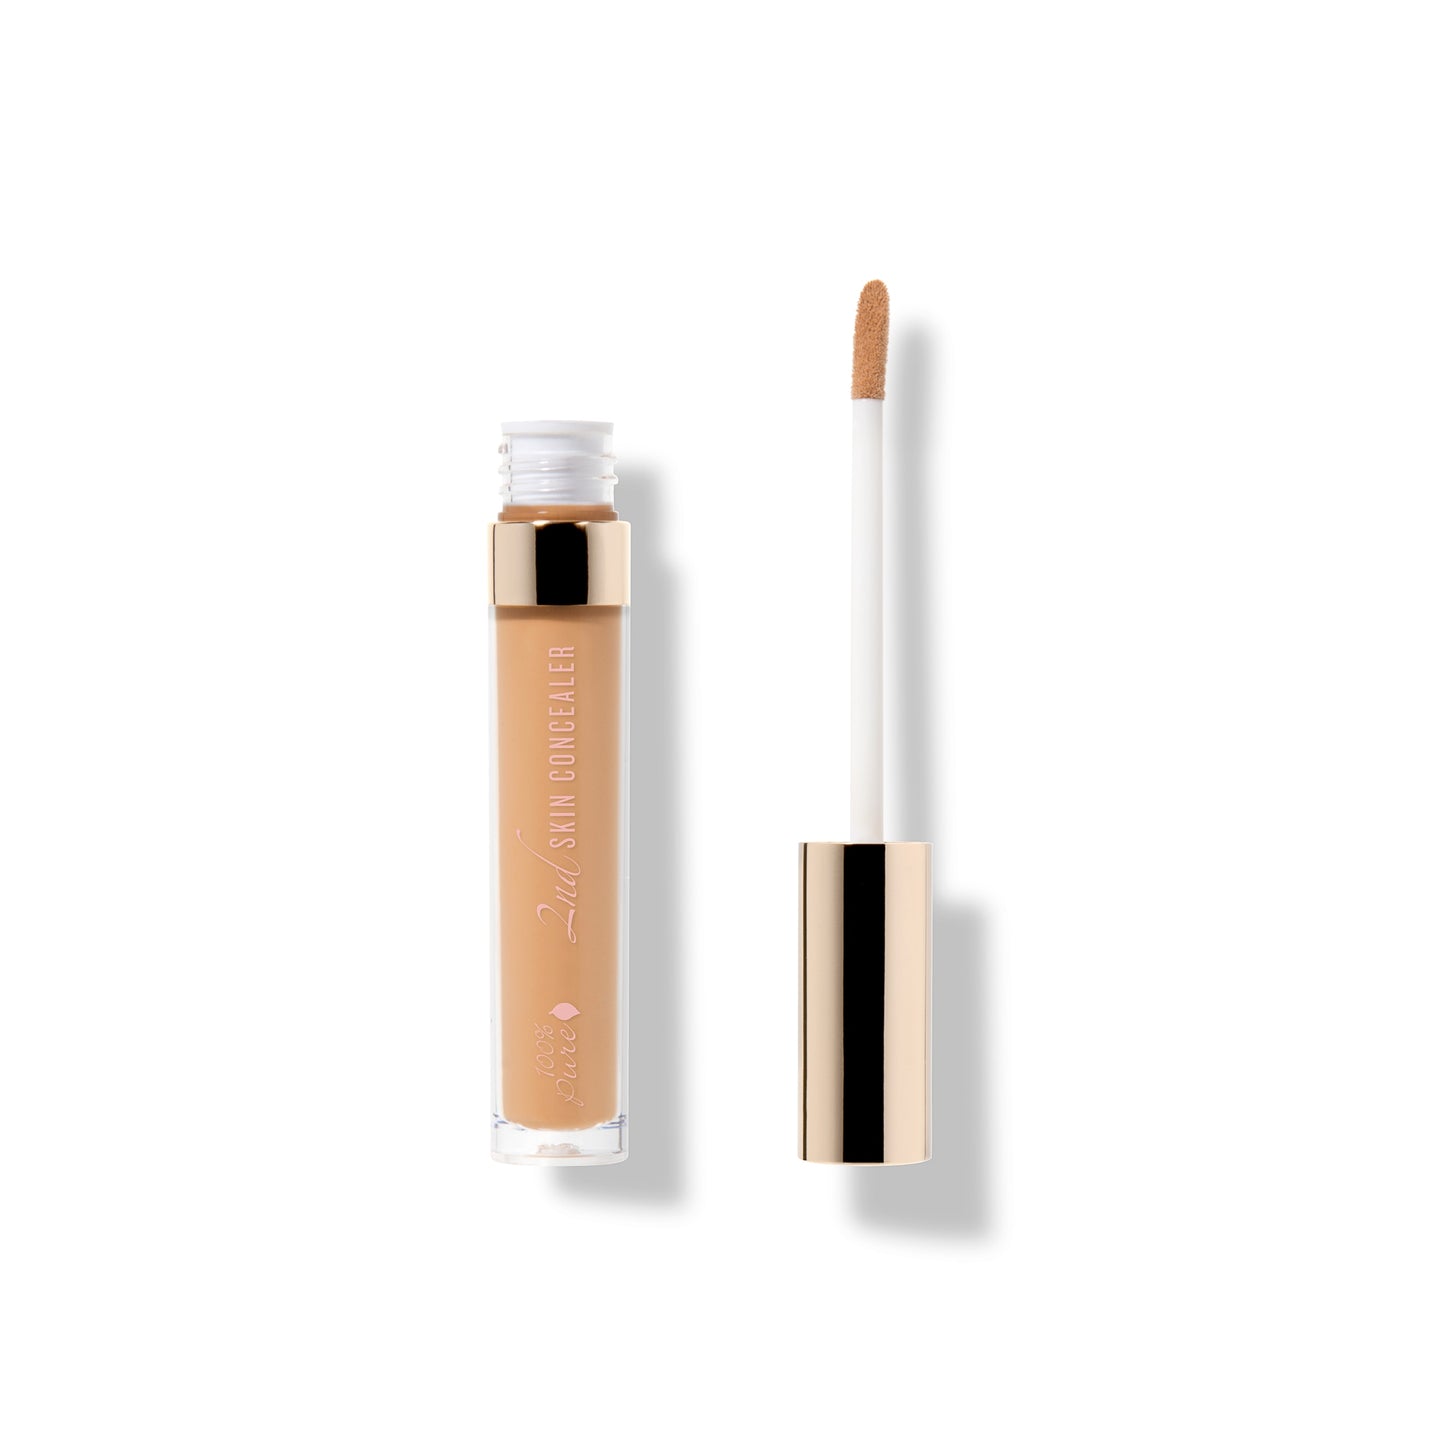 100% PURE Fruit Pigmented 2nd Skin Concealer shade 2